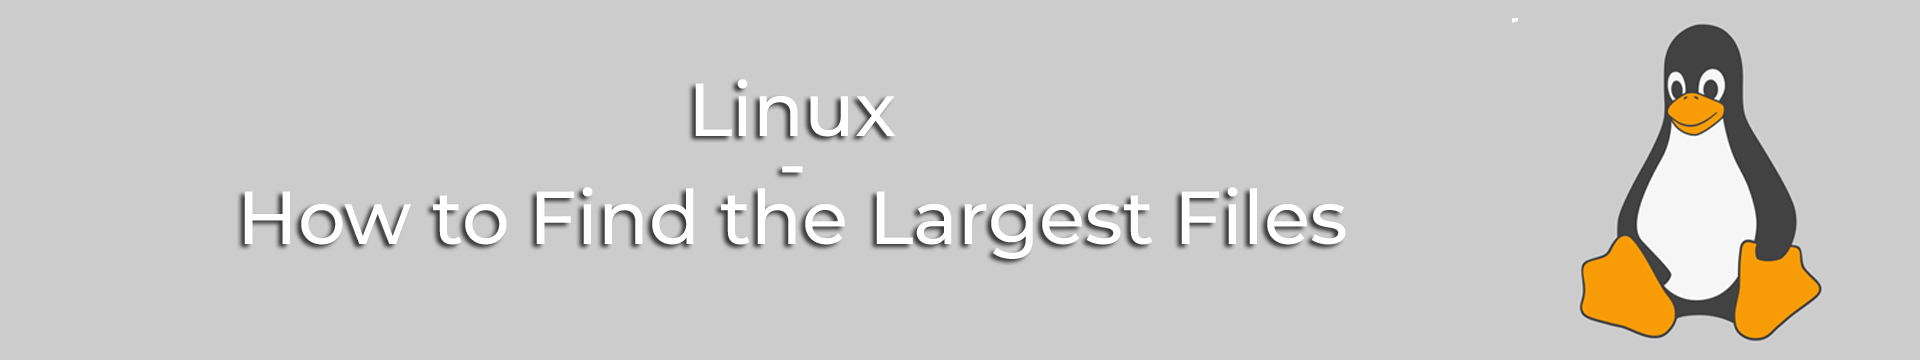 How to Find the Largest Files in Linux